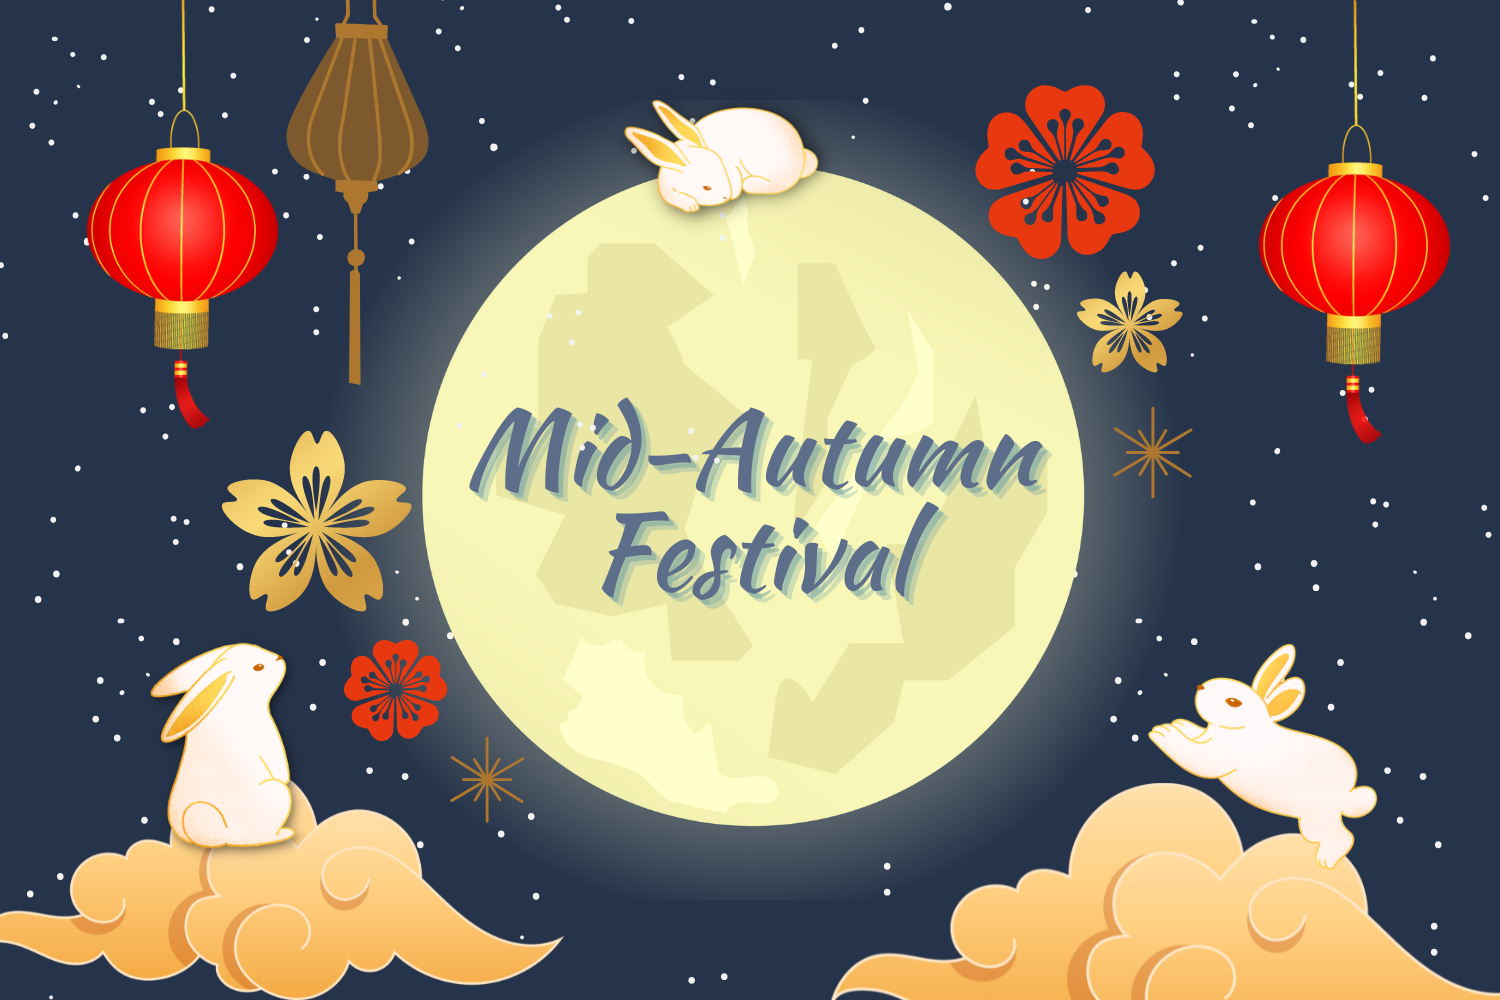 Today is Mid-Autumn Festival!